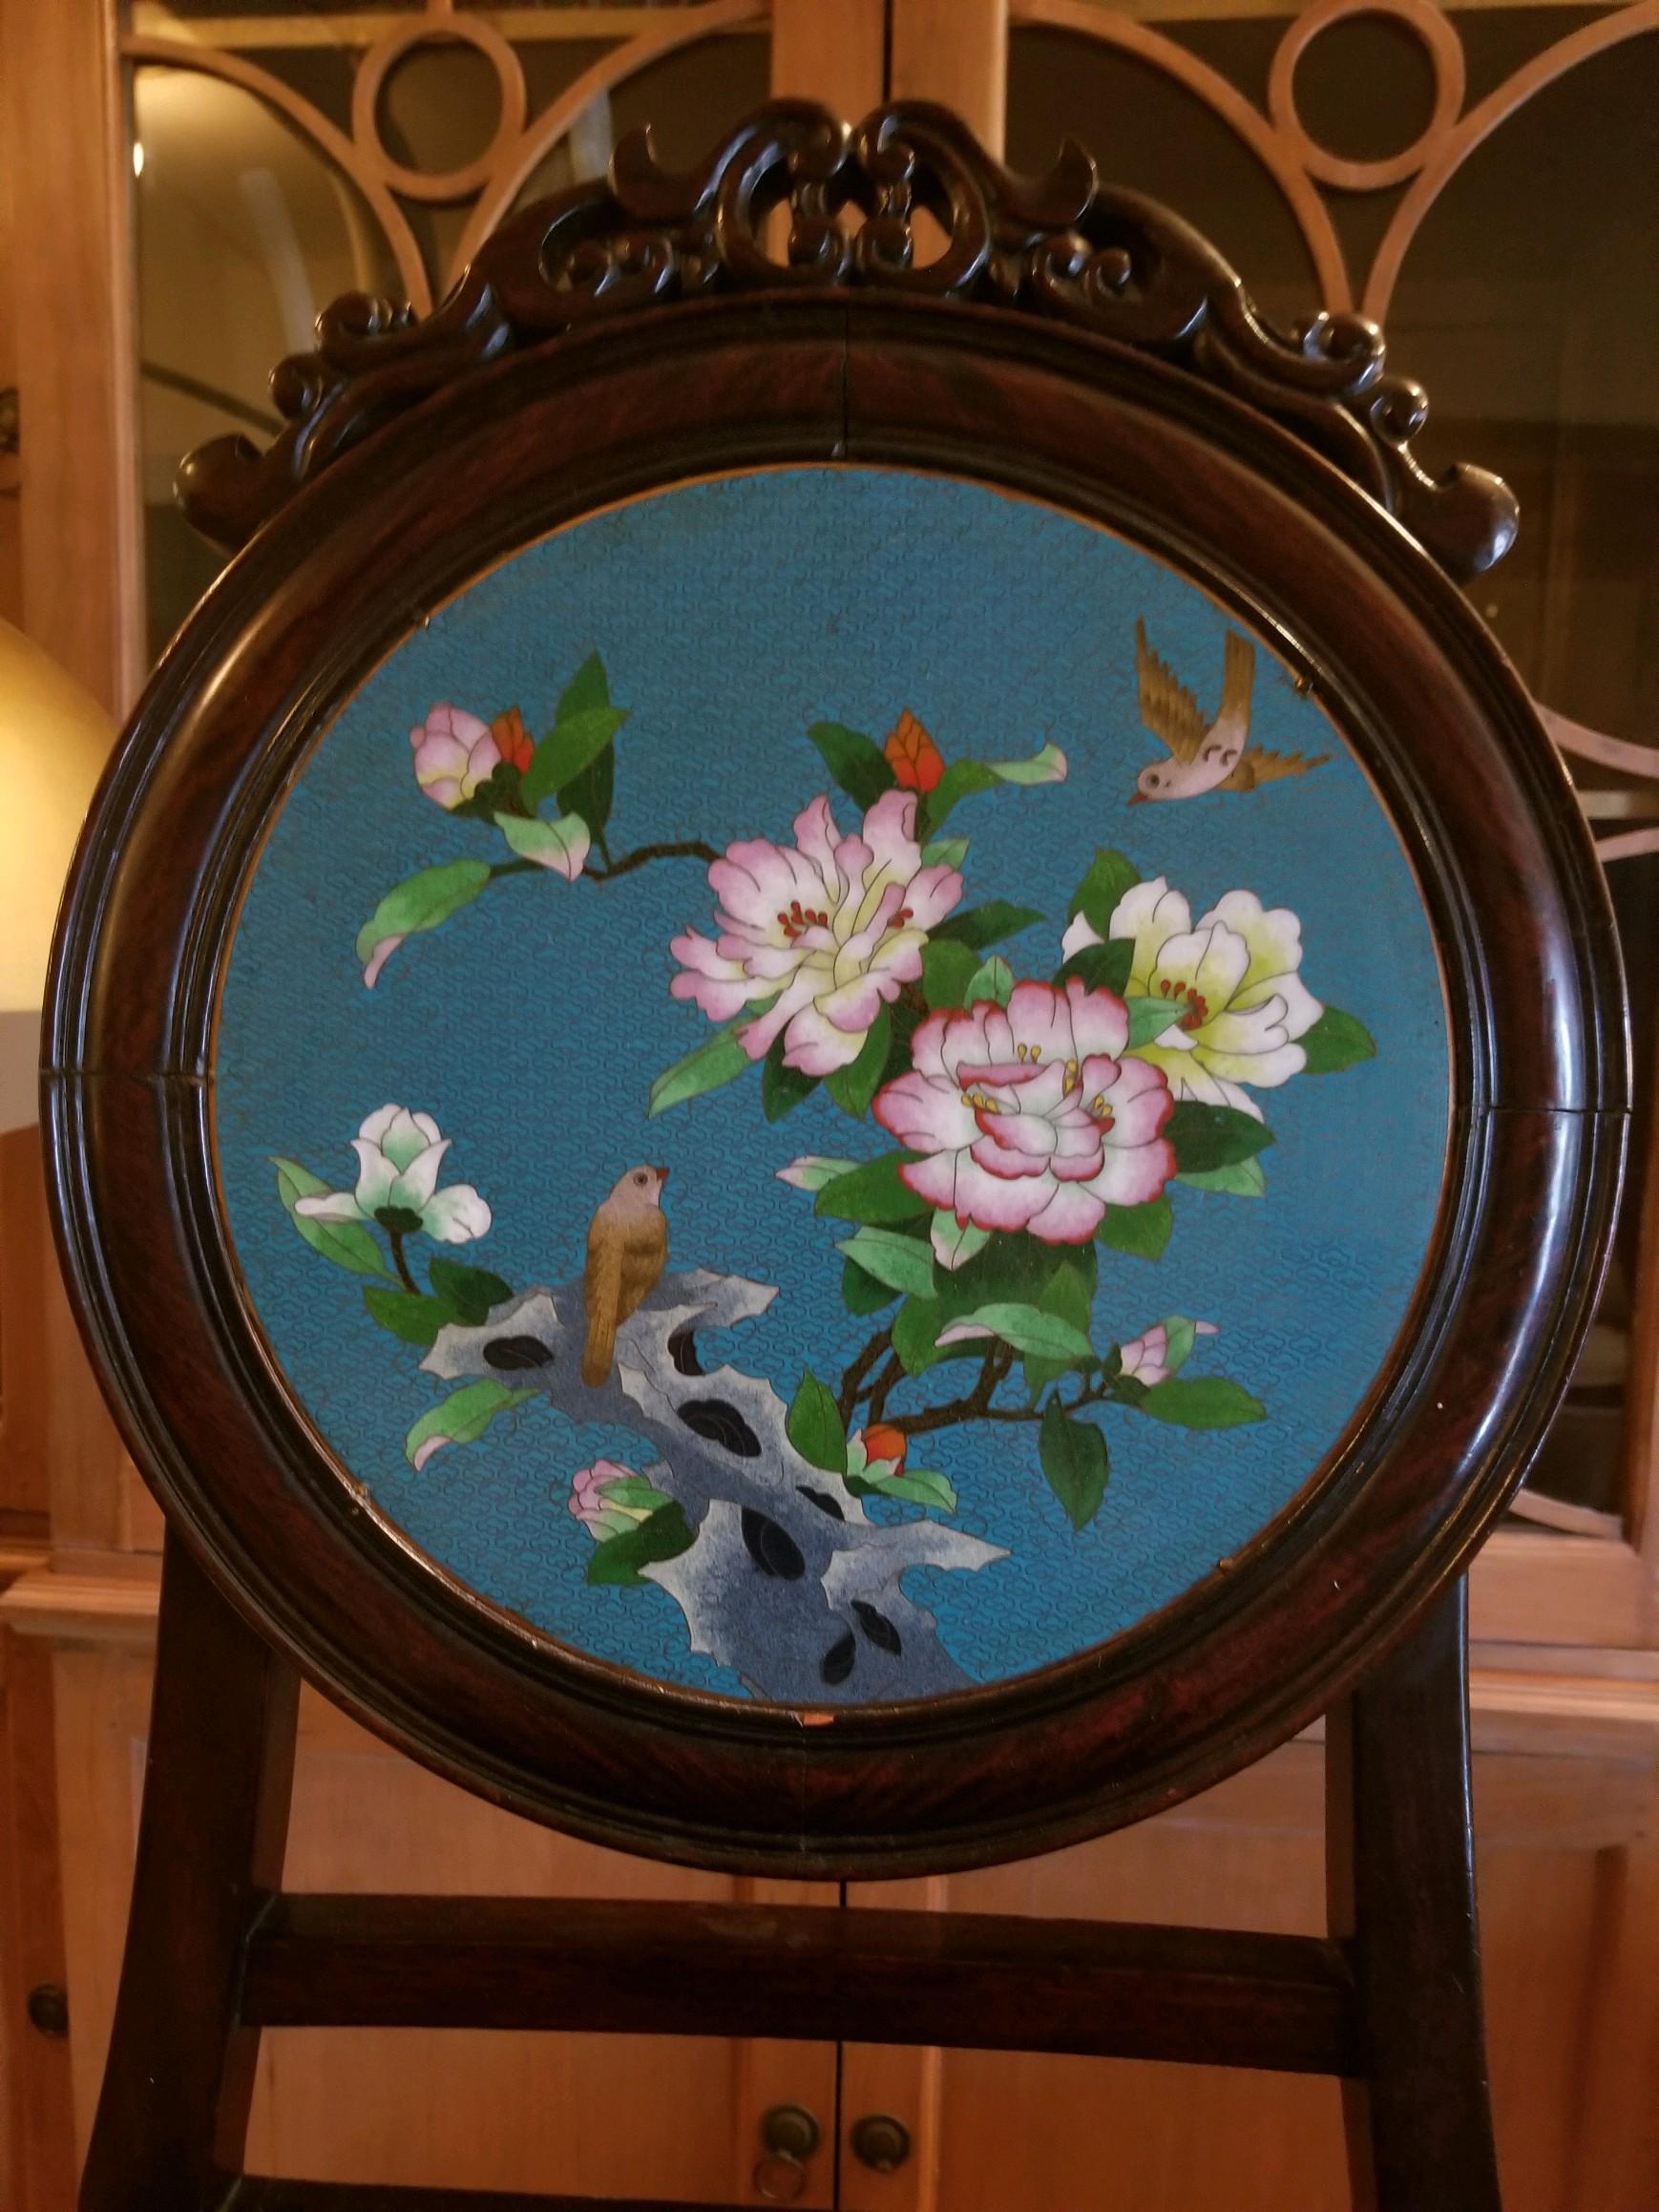 Chinese enameled back hall chair. Age unknown, but a spectacular piece. The enameling has metal framing and a wonderful floral scene with a Classic blue back ground. Use anywhere, dressing room, Entry hall or as pull up chair for dining. I love when